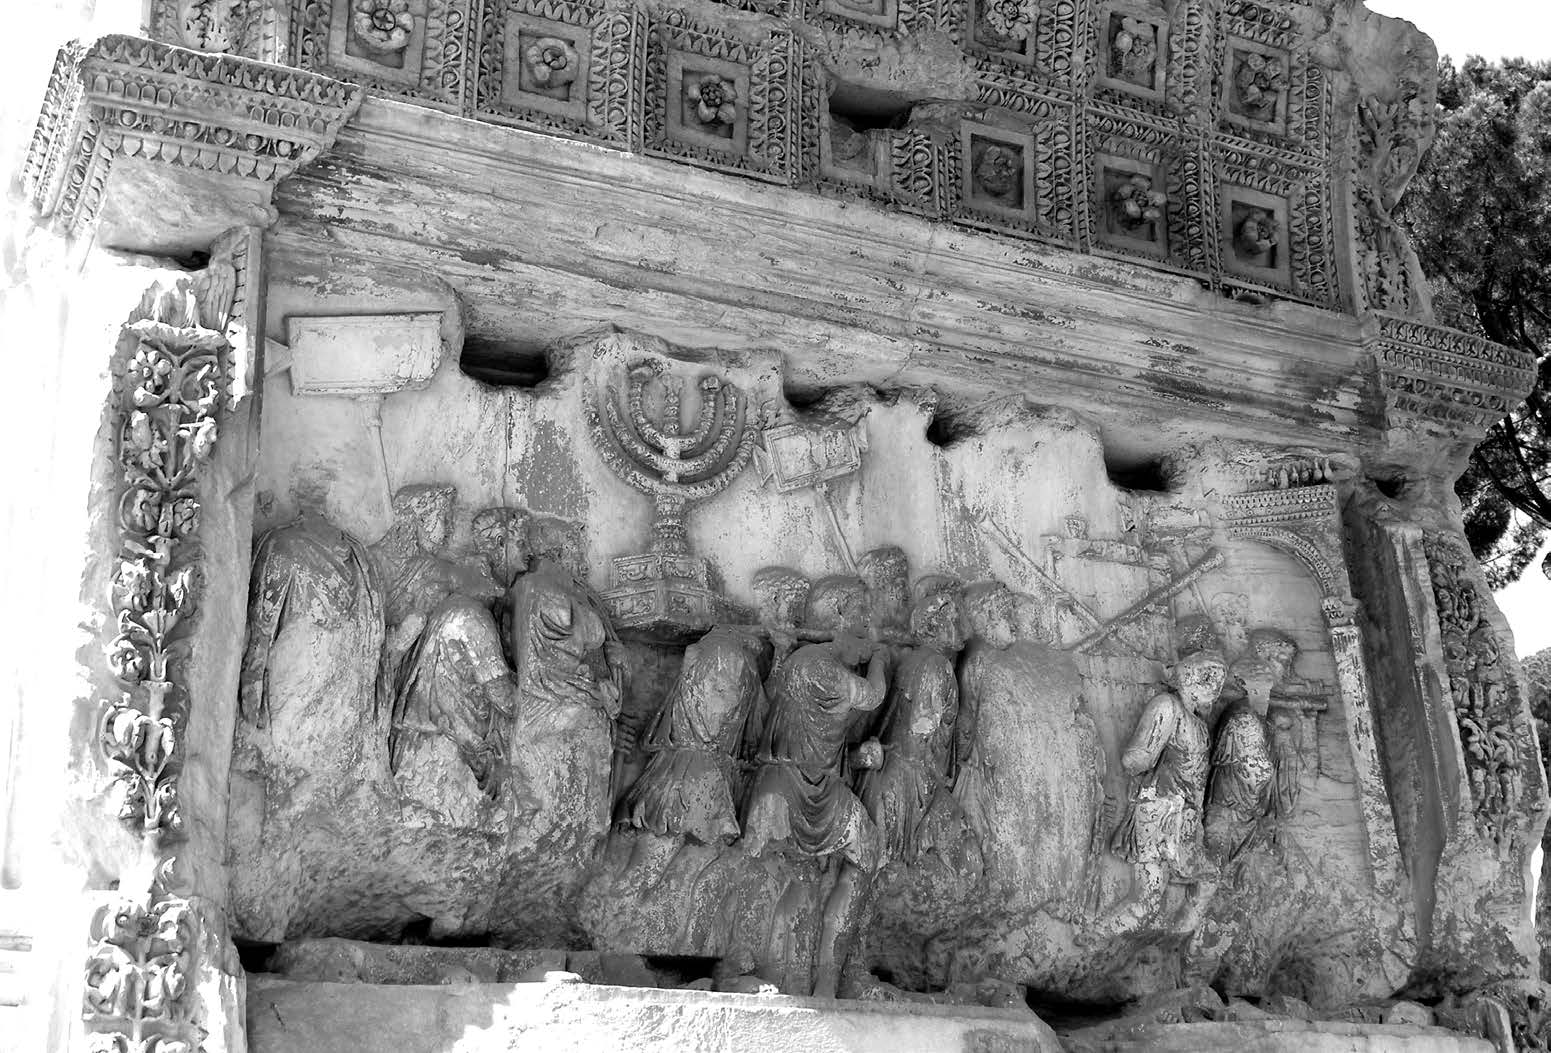 Relief from the Arch of Titus Showing the Spoils of the Jerusalem Siege (Courtesy: Lincoln H. Blumell).